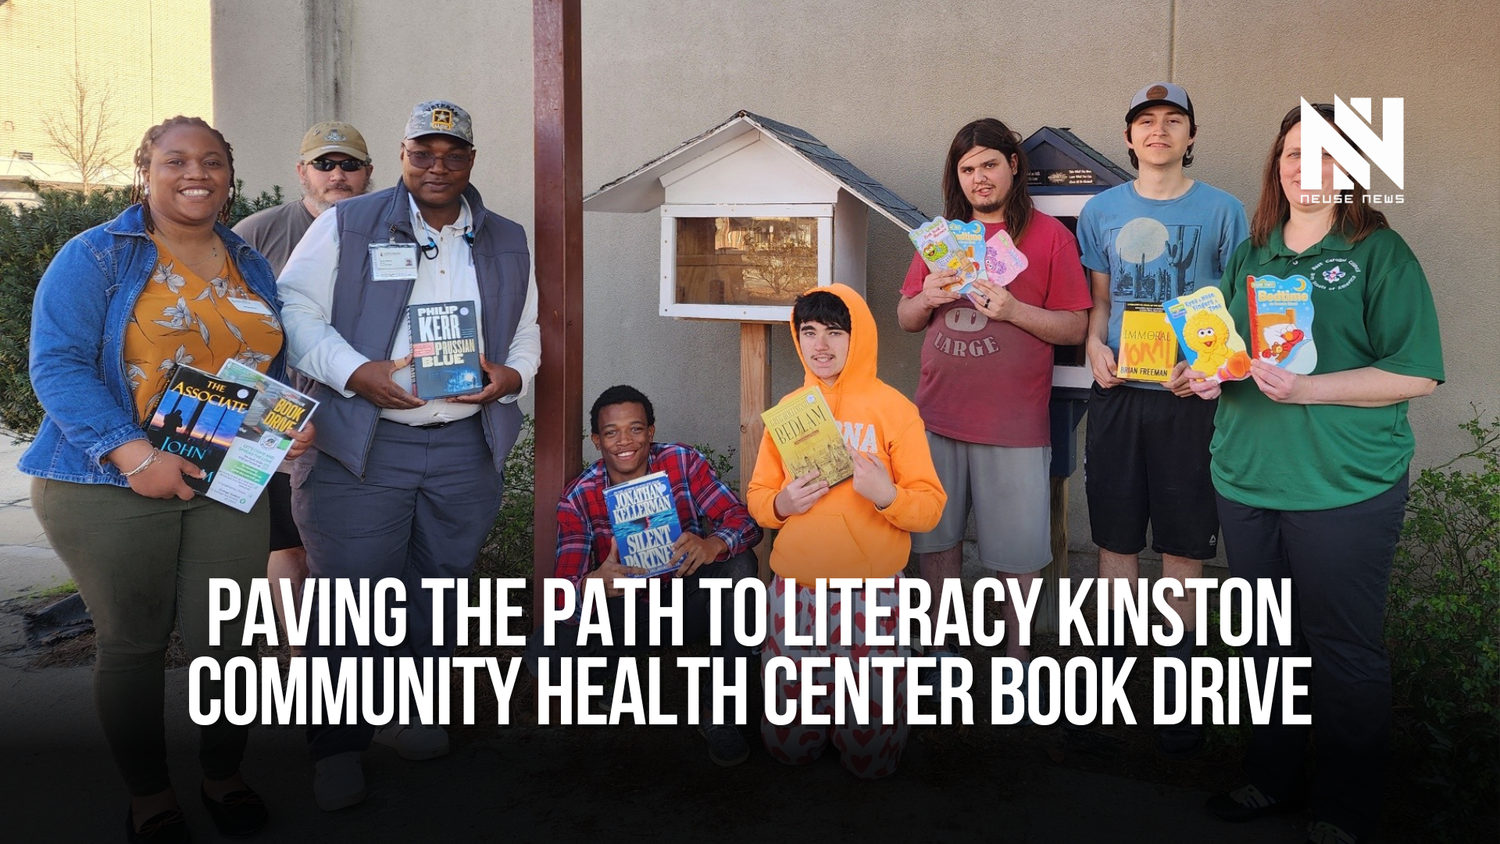 Kinston Community Health Center Book Drive: Building a Foundation for Literacy